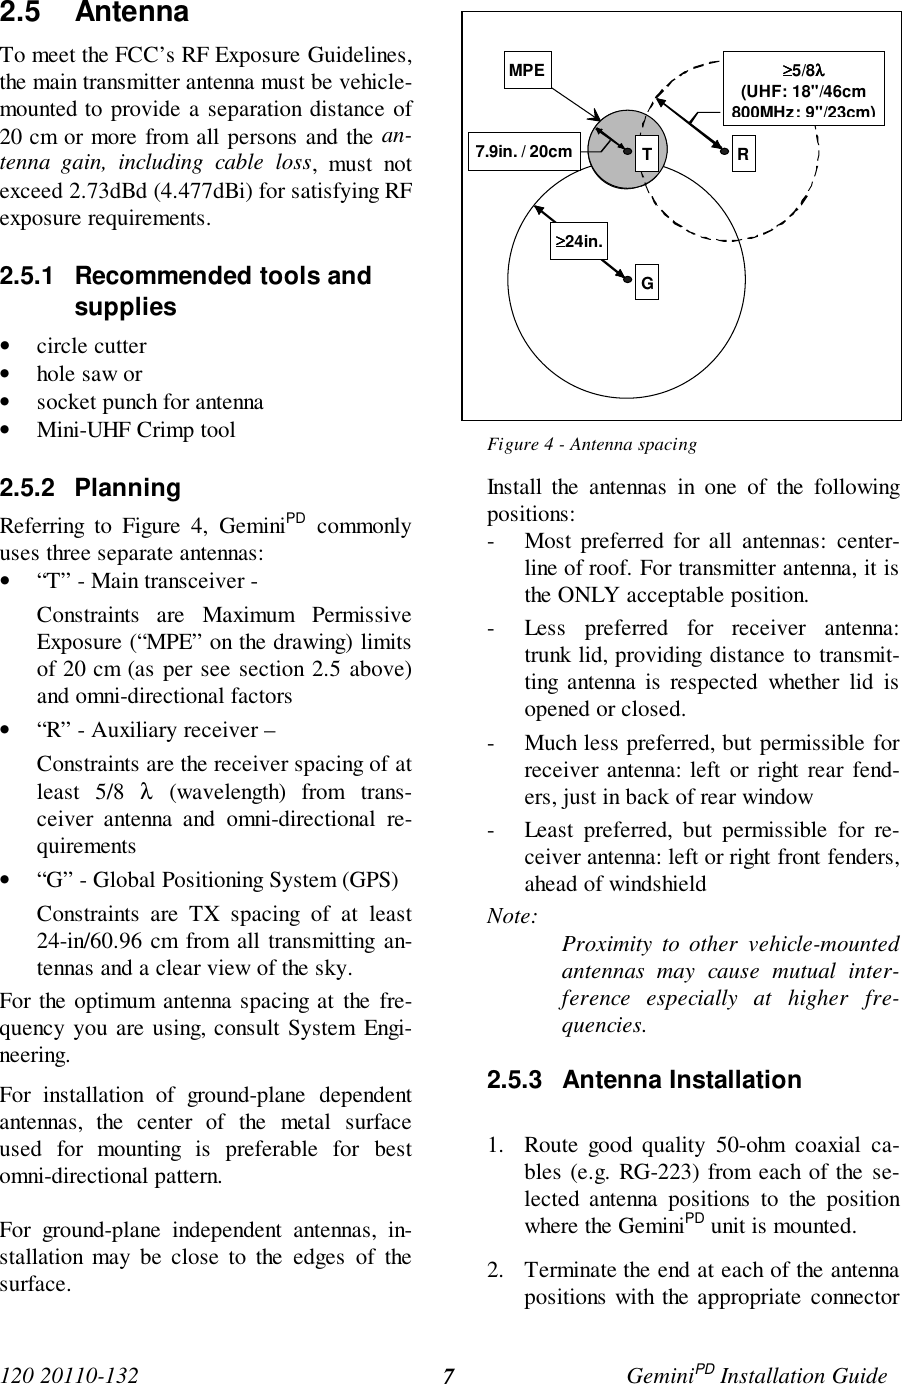 120 20110-132 GeminiPD Installation Guide72.5 AntennaTo meet the FCC’s RF Exposure Guidelines,the main transmitter antenna must be vehicle-mounted to provide a separation distance of20 cm or more from all persons and the an-tenna gain, including cable loss, must notexceed 2.73dBd (4.477dBi) for satisfying RFexposure requirements.2.5.1  Recommended tools andsupplies• circle cutter• hole saw or• socket punch for antenna• Mini-UHF Crimp tool2.5.2 PlanningReferring to Figure 4, GeminiPD commonlyuses three separate antennas:• “T” - Main transceiver -Constraints are Maximum PermissiveExposure (“MPE” on the drawing) limitsof 20 cm (as per see section 2.5 above)and omni-directional factors• “R” - Auxiliary receiver –Constraints are the receiver spacing of atleast 5/8 λ (wavelength) from trans-ceiver antenna and omni-directional re-quirements• “G” - Global Positioning System (GPS)Constraints are TX spacing of at least24-in/60.96 cm from all transmitting an-tennas and a clear view of the sky.For the optimum antenna spacing at the fre-quency you are using, consult System Engi-neering.For installation of ground-plane dependentantennas, the center of the metal surfaceused for mounting is preferable for bestomni-directional pattern.For ground-plane independent antennas, in-stallation may be close to the edges of thesurface.Figure 4 - Antenna spacingInstall the antennas in one of the followingpositions:- Most preferred for all antennas: center-line of roof. For transmitter antenna, it isthe ONLY acceptable position.- Less preferred for receiver antenna:trunk lid, providing distance to transmit-ting antenna is respected whether lid isopened or closed.- Much less preferred, but permissible forreceiver antenna: left or right rear fend-ers, just in back of rear window- Least preferred, but permissible for re-ceiver antenna: left or right front fenders,ahead of windshieldNote: Proximity to other vehicle-mountedantennas may cause mutual inter-ference especially at higher fre-quencies.2.5.3 Antenna Installation1. Route good quality 50-ohm coaxial ca-bles (e.g. RG-223) from each of the se-lected antenna positions to the positionwhere the GeminiPD unit is mounted.2. Terminate the end at each of the antennapositions with the appropriate connectorMPE ≥≥≥≥5/8λλλλ(UHF: 18&quot;/46cm800MHz: 9&quot;/23cm)7.9in. / 20cm≥≥≥≥24in.T RG